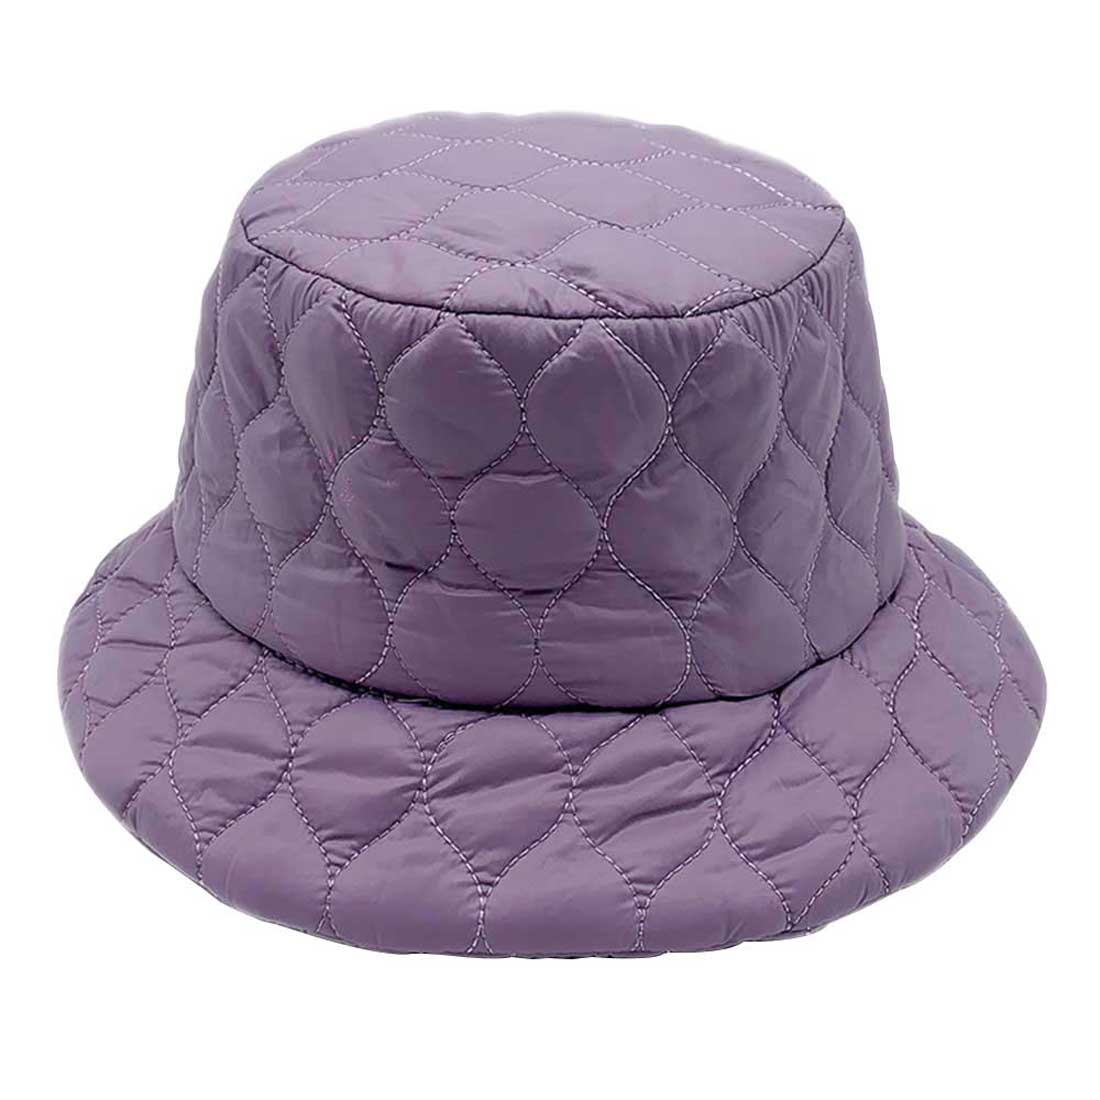 Lavender Wave Padded Bucket Hat, Show your trendy side with this chic Wave Padded Bucket Hat. Have fun and look Stylish anywhere outdoors. Great for covering up when you are having a bad hair day. Perfect for protecting you from the sun, rain, wind, snow, beach, pool, camping, or any outdoor activities. Amps up your outlook with confidence with this trendy bucket hat.